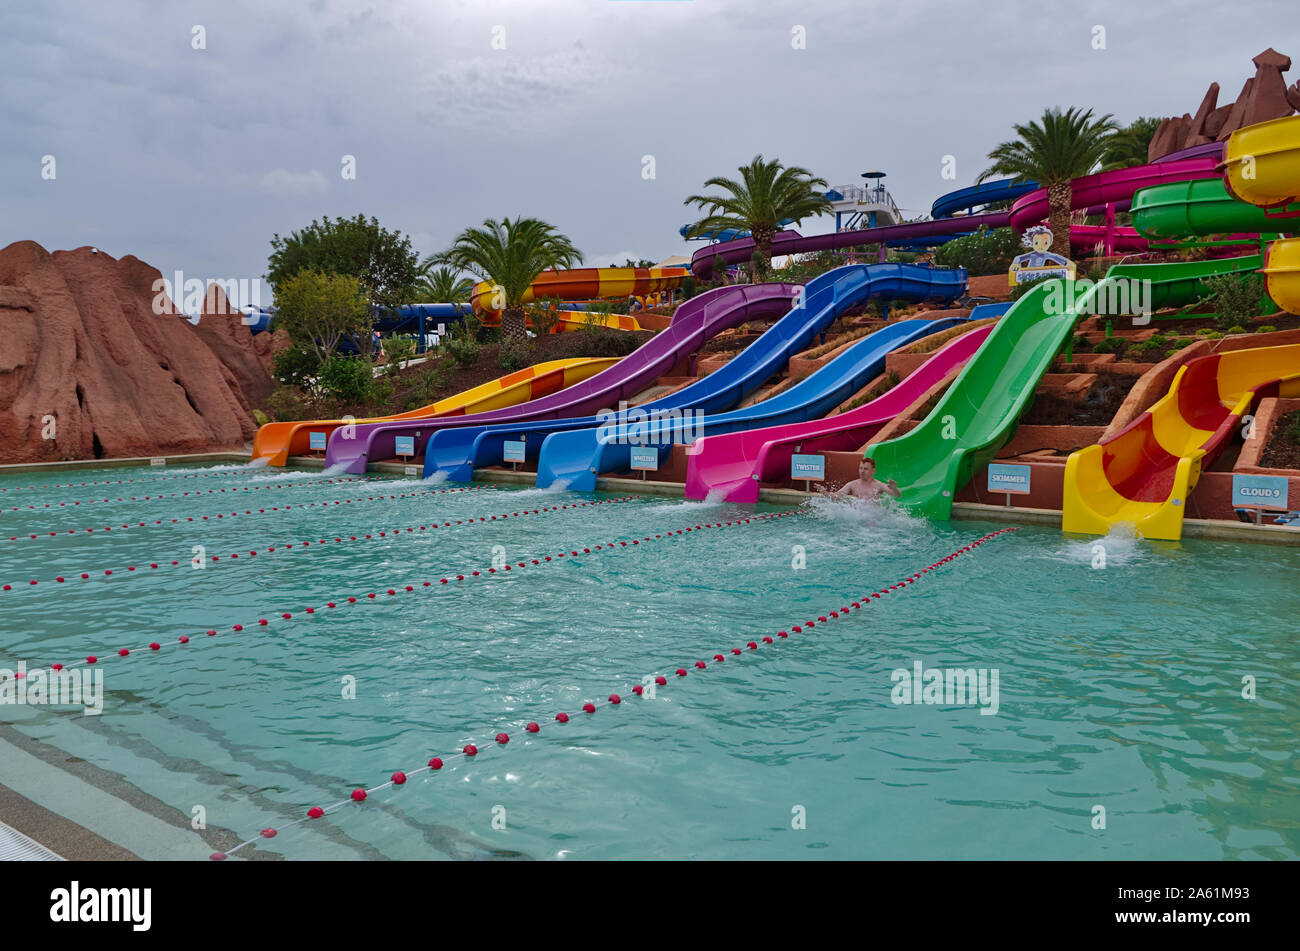 Slide and Splash water park, famous park and tourist attraction during summer season. In Lagoa, Algarve, Portugal Stock Photo